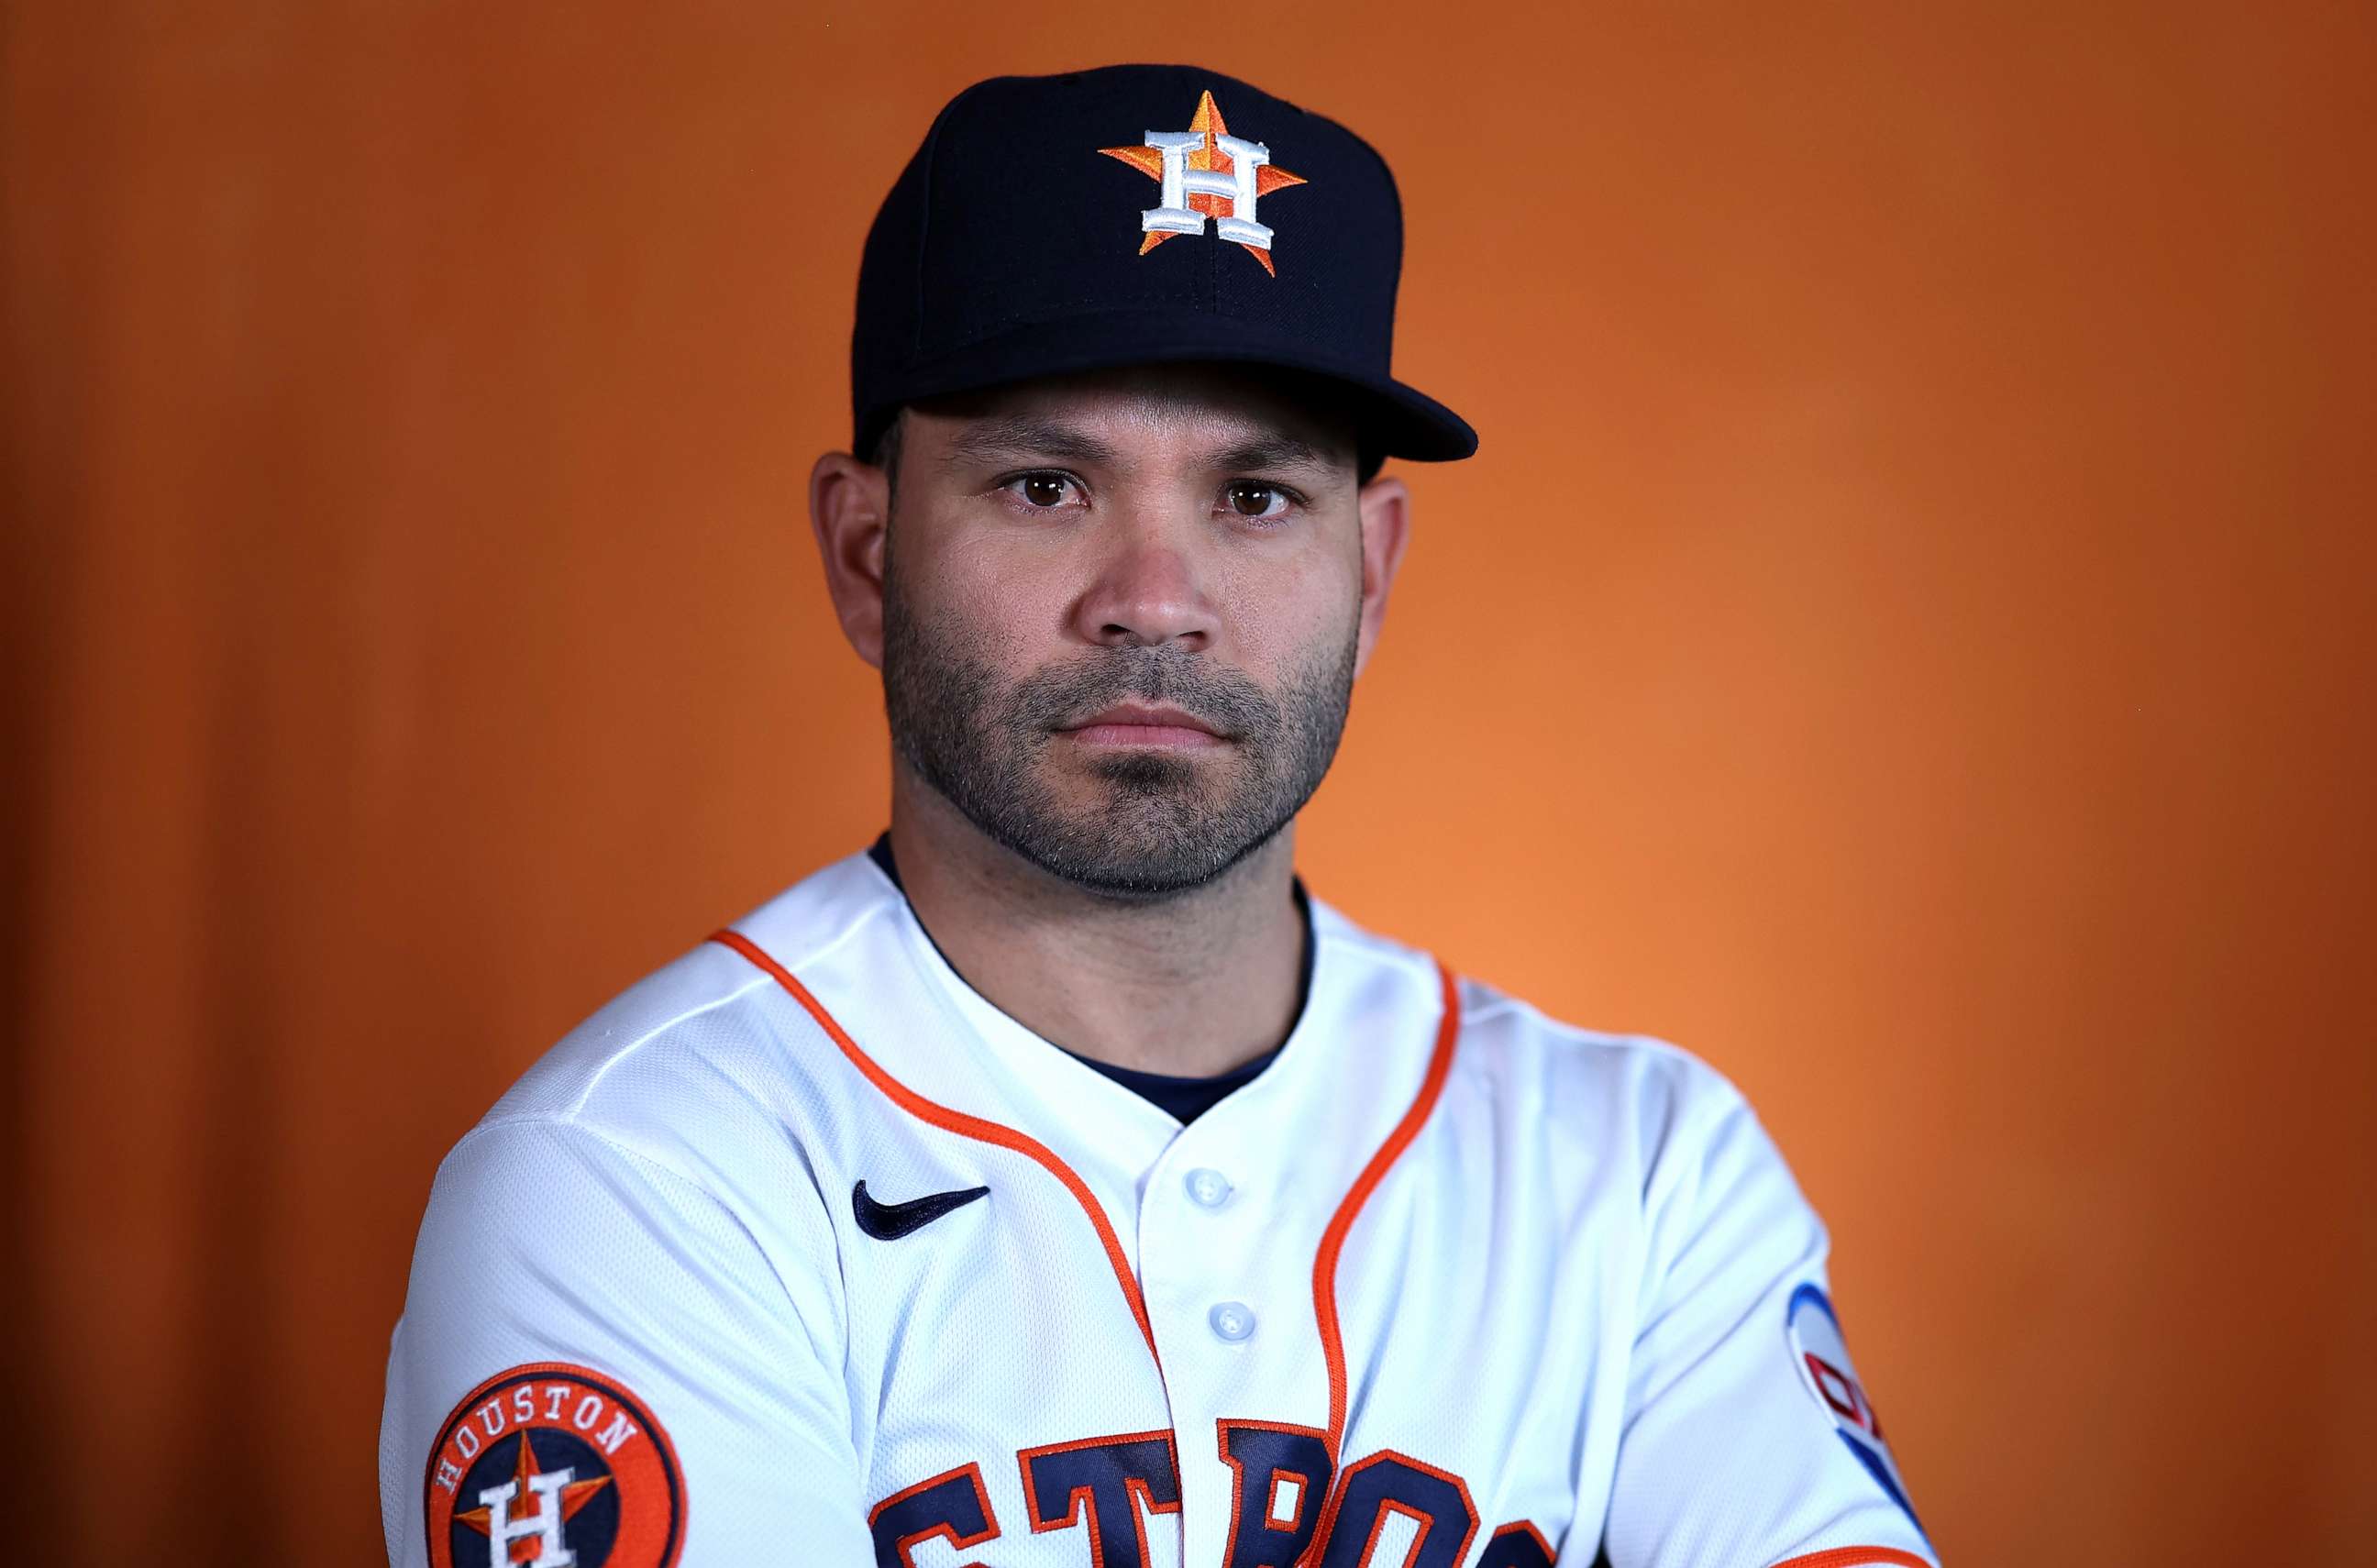 PHOTO: Jose Altuve of the Houston Astros poses for a portrait during photo days at The Ballpark of the Palm Beaches, Feb. 23, 2023, in West Palm Beach, Fla.